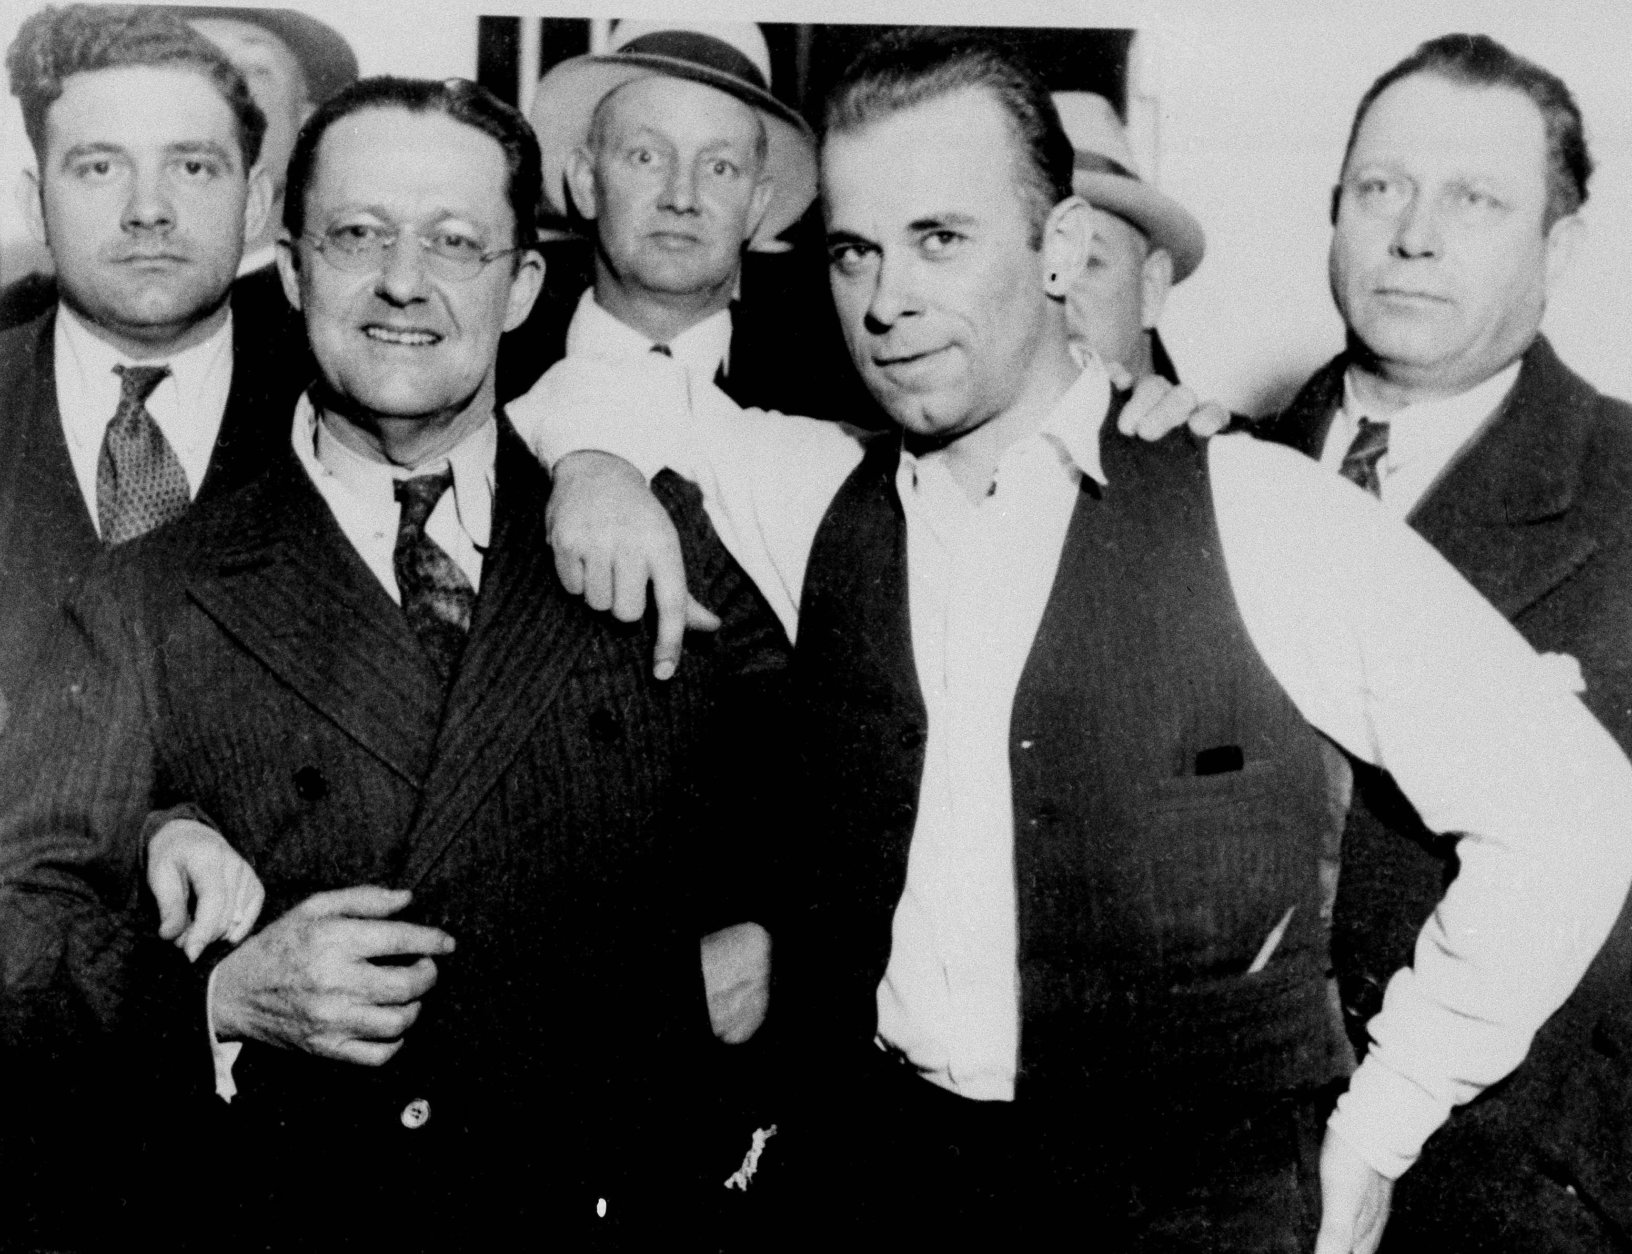 Captured desperado John Dillinger, wearing vest, strikes a jaunty pose with prosecutor Robert Estill in what would become an infamous image at the Crown Point, Ind., jailhouse, Feb. 1934. (AP Photo)